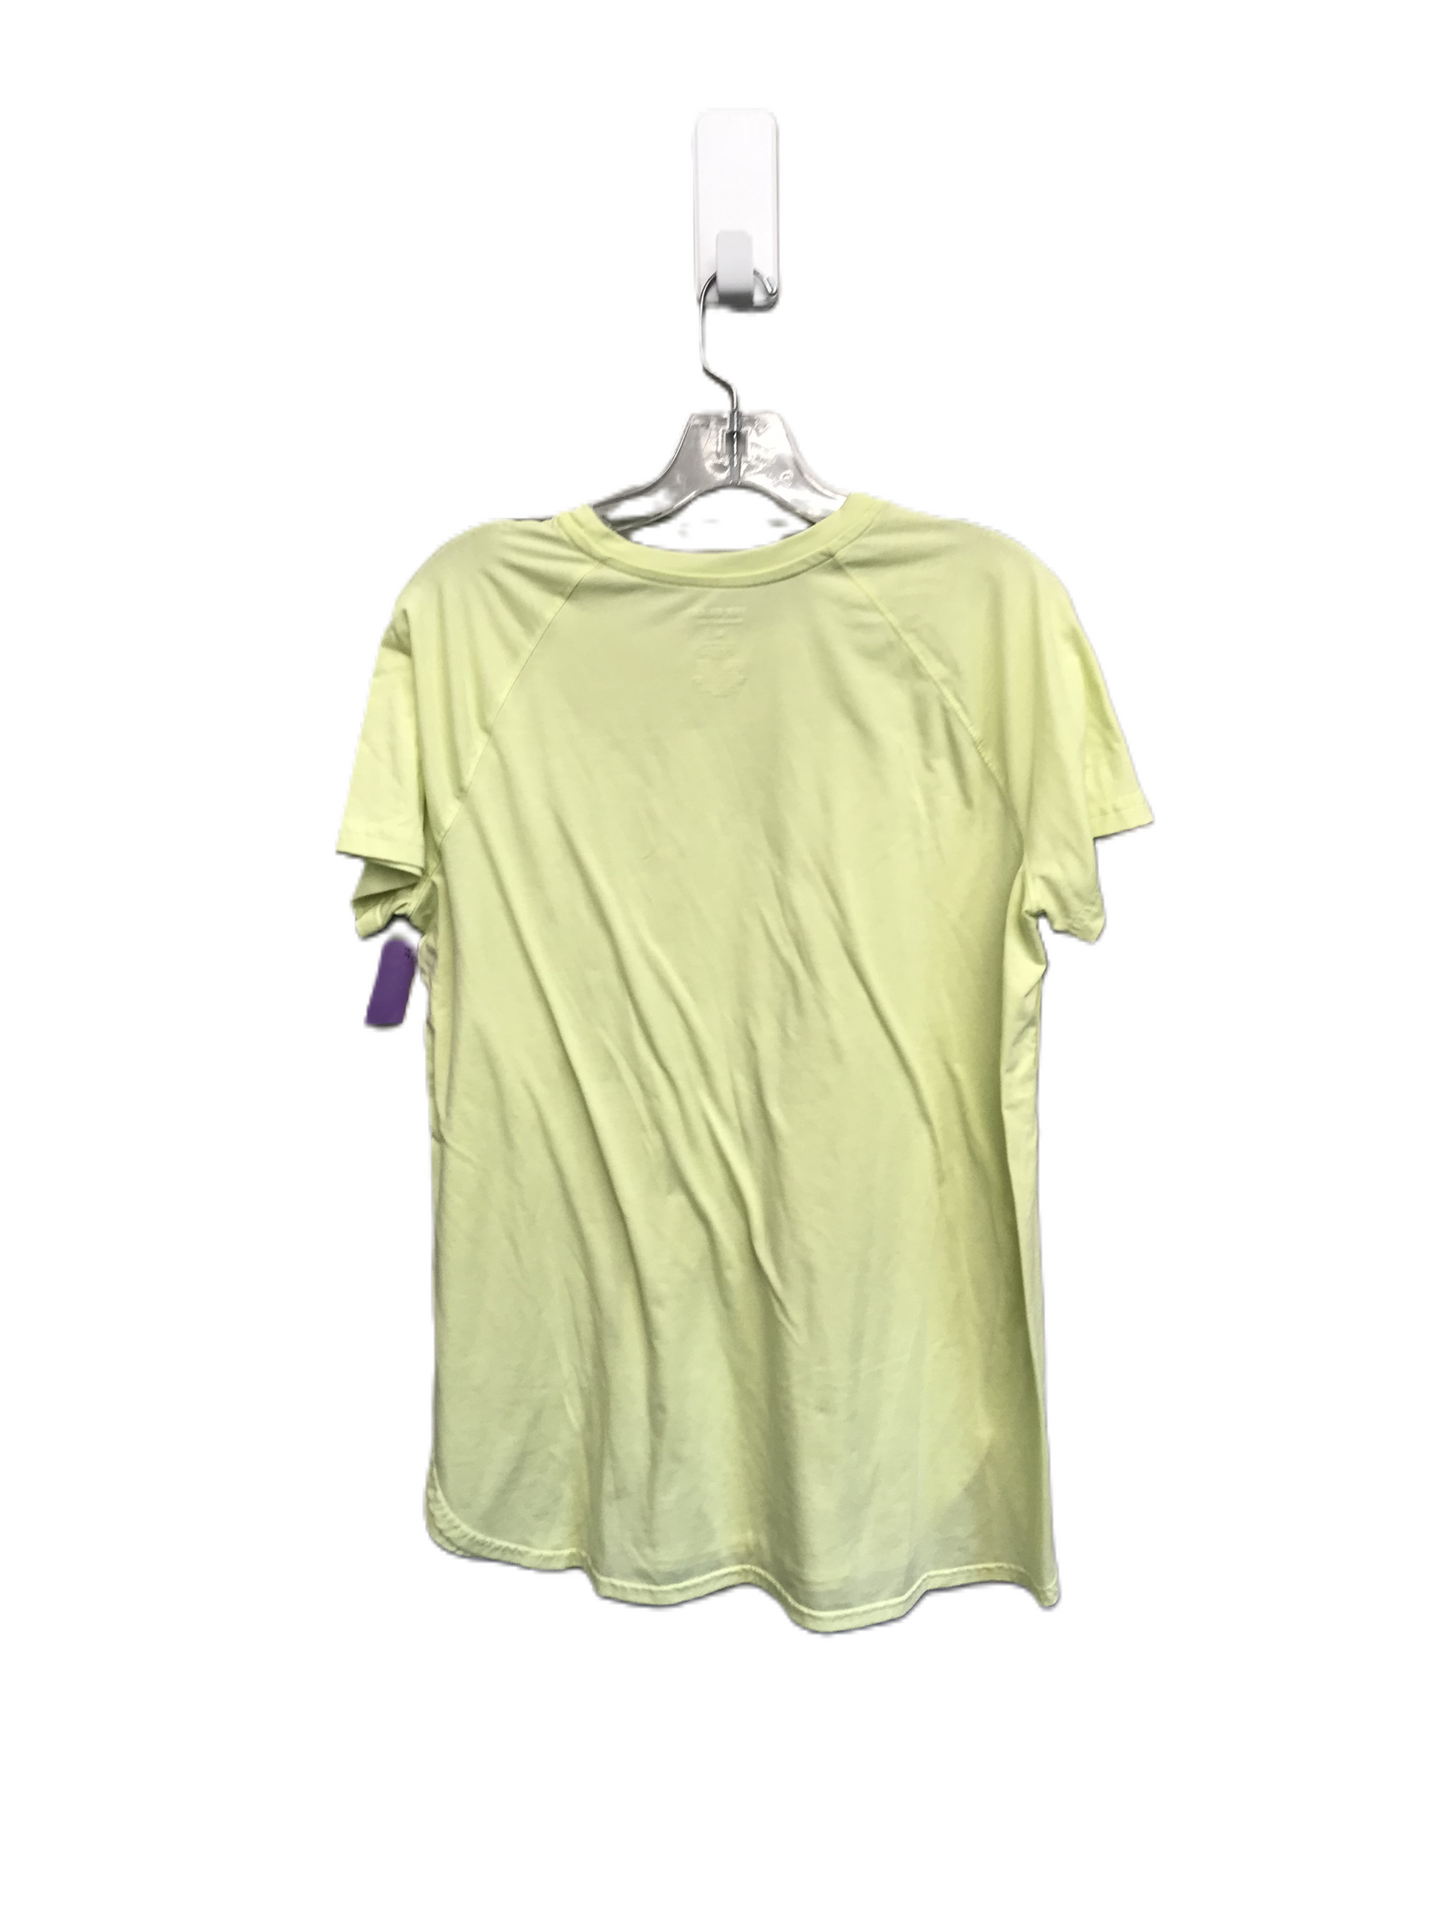 Chartreuse Athletic Top Short Sleeve By Tek Gear, Size: L